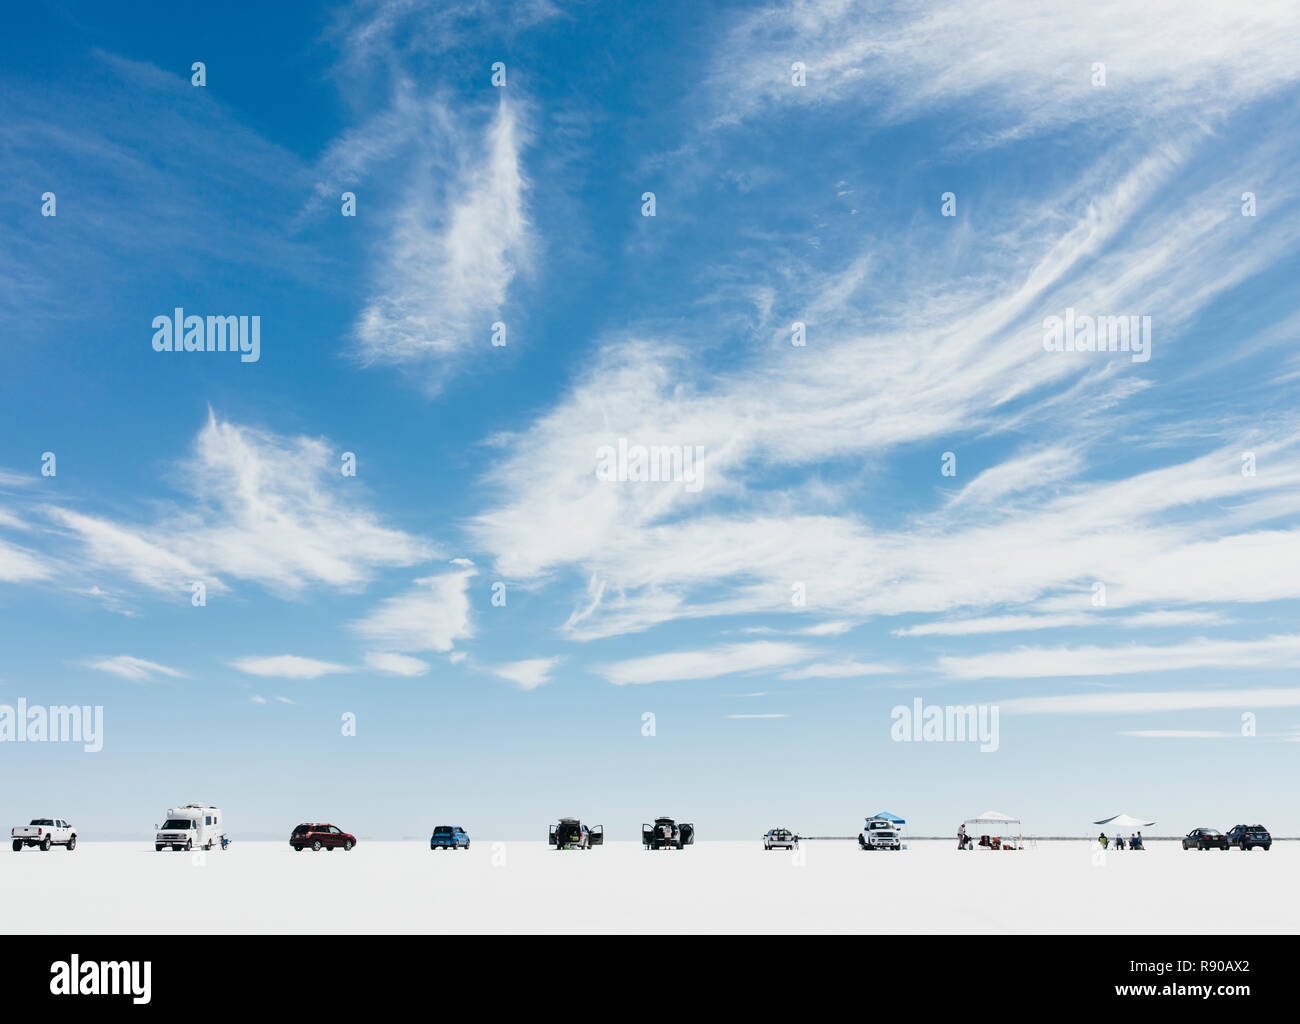 Cars and spectators lined up on Salt Flats during World of Speed Stock Photo